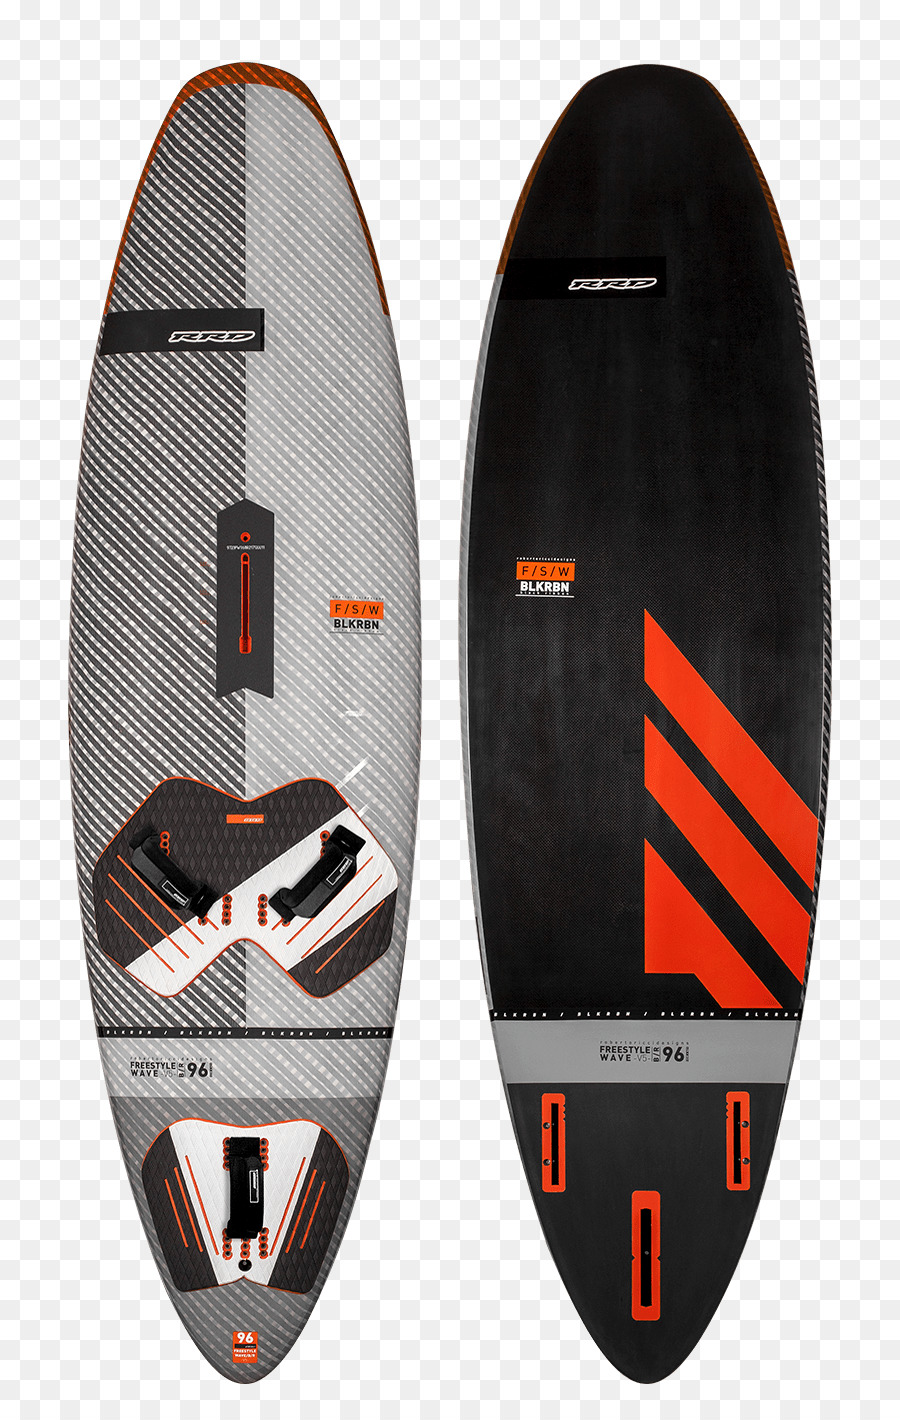 Windsurf-Wave-Band Air-Jibe Toujours compact - Welle